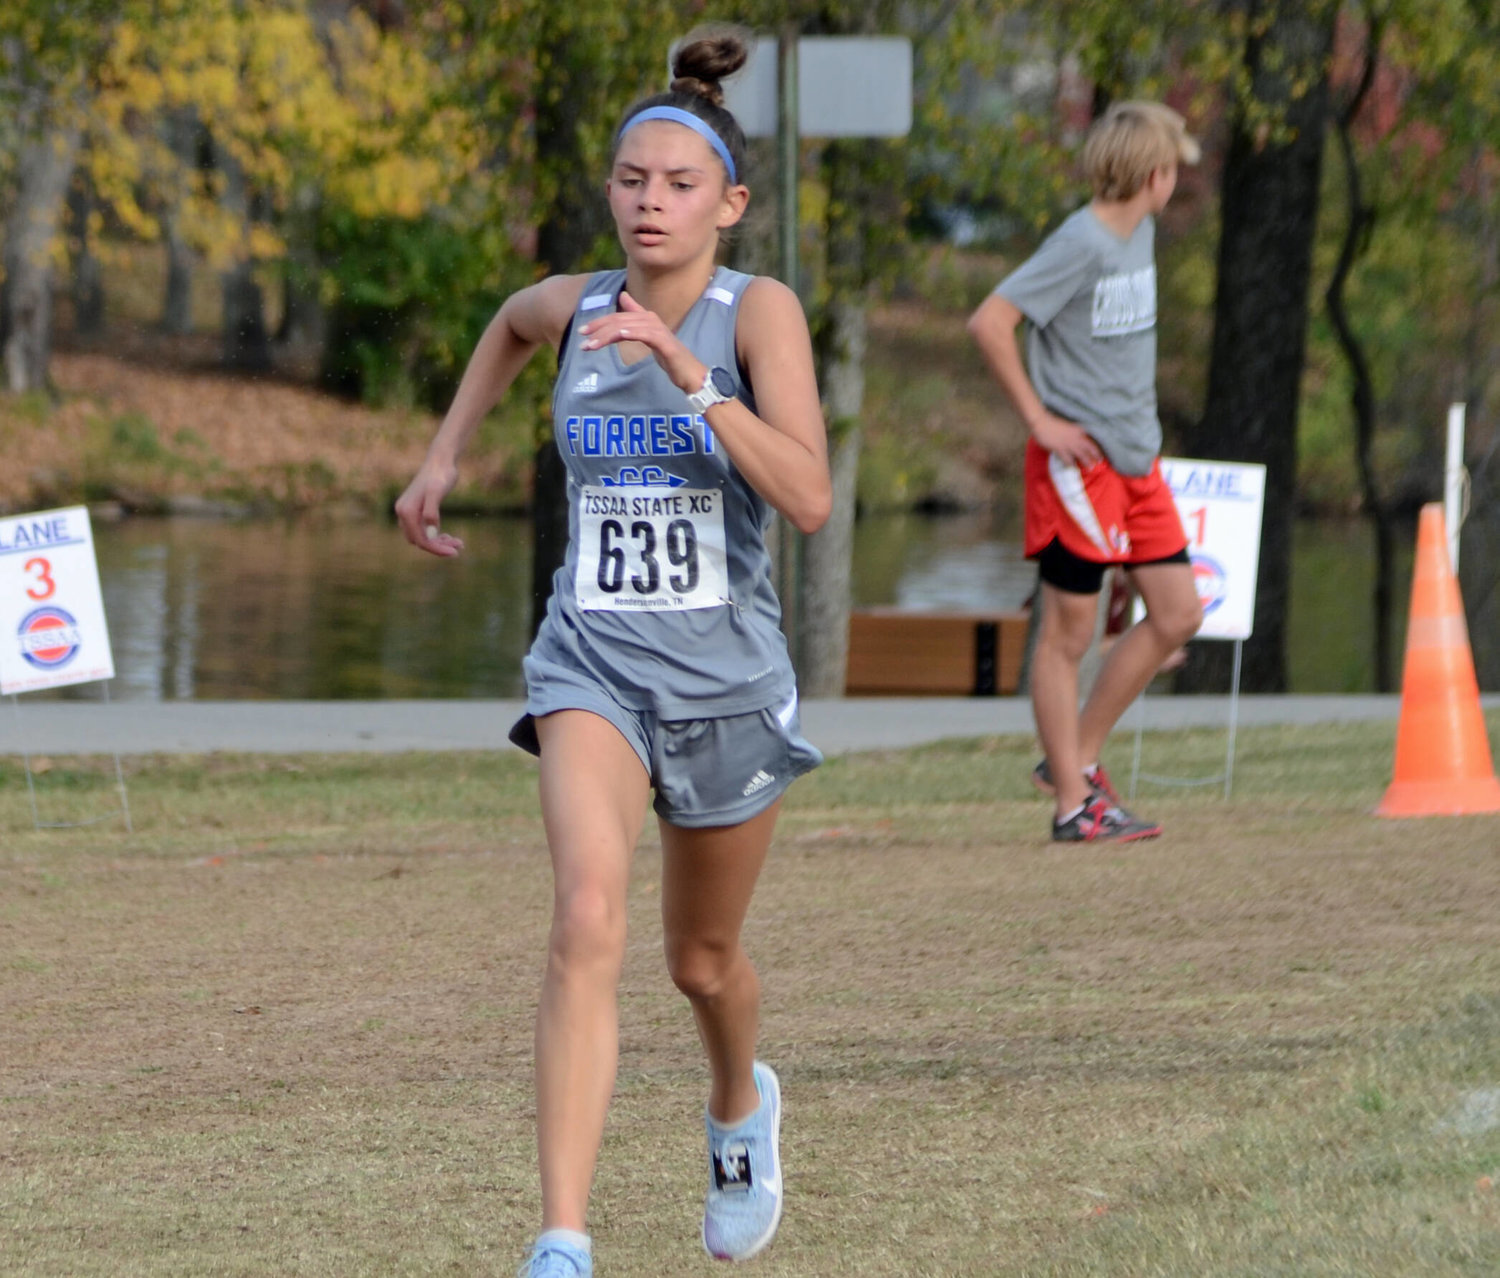 Forrest sophomore Jaedyn Stalnecker kicks to the finish at the TSSAA State Cross Country Championships where she finished in third place.